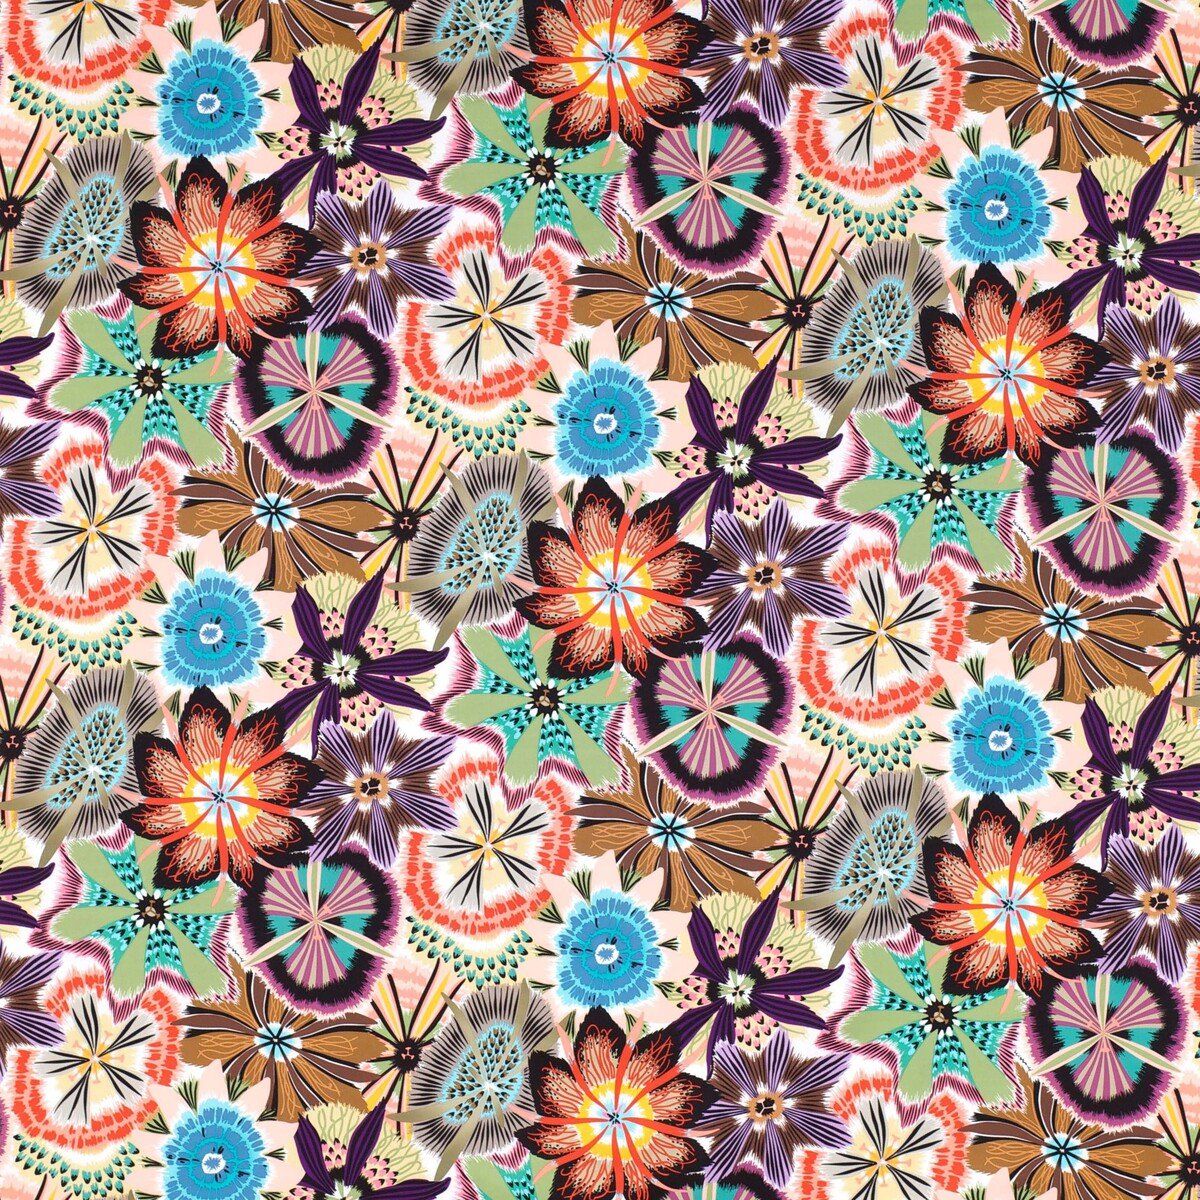 Buy Kravet Couture Passiflora Yard T Fabric Missoni Collection Home the by 36181-510 Multipurpose